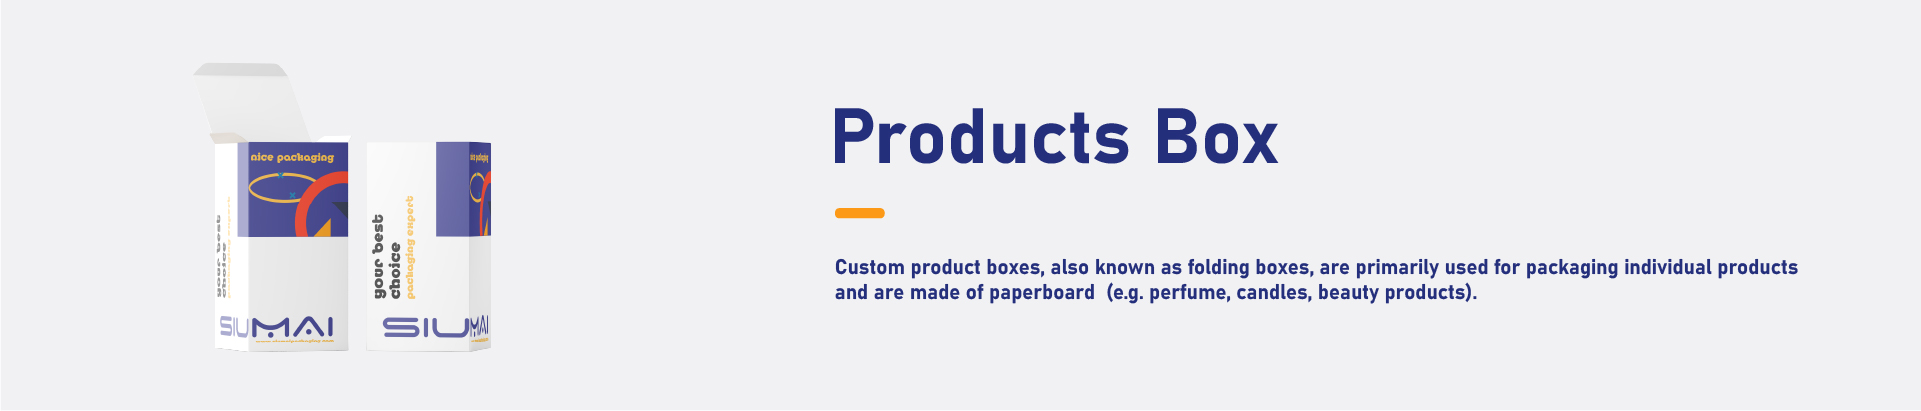 Products boxes